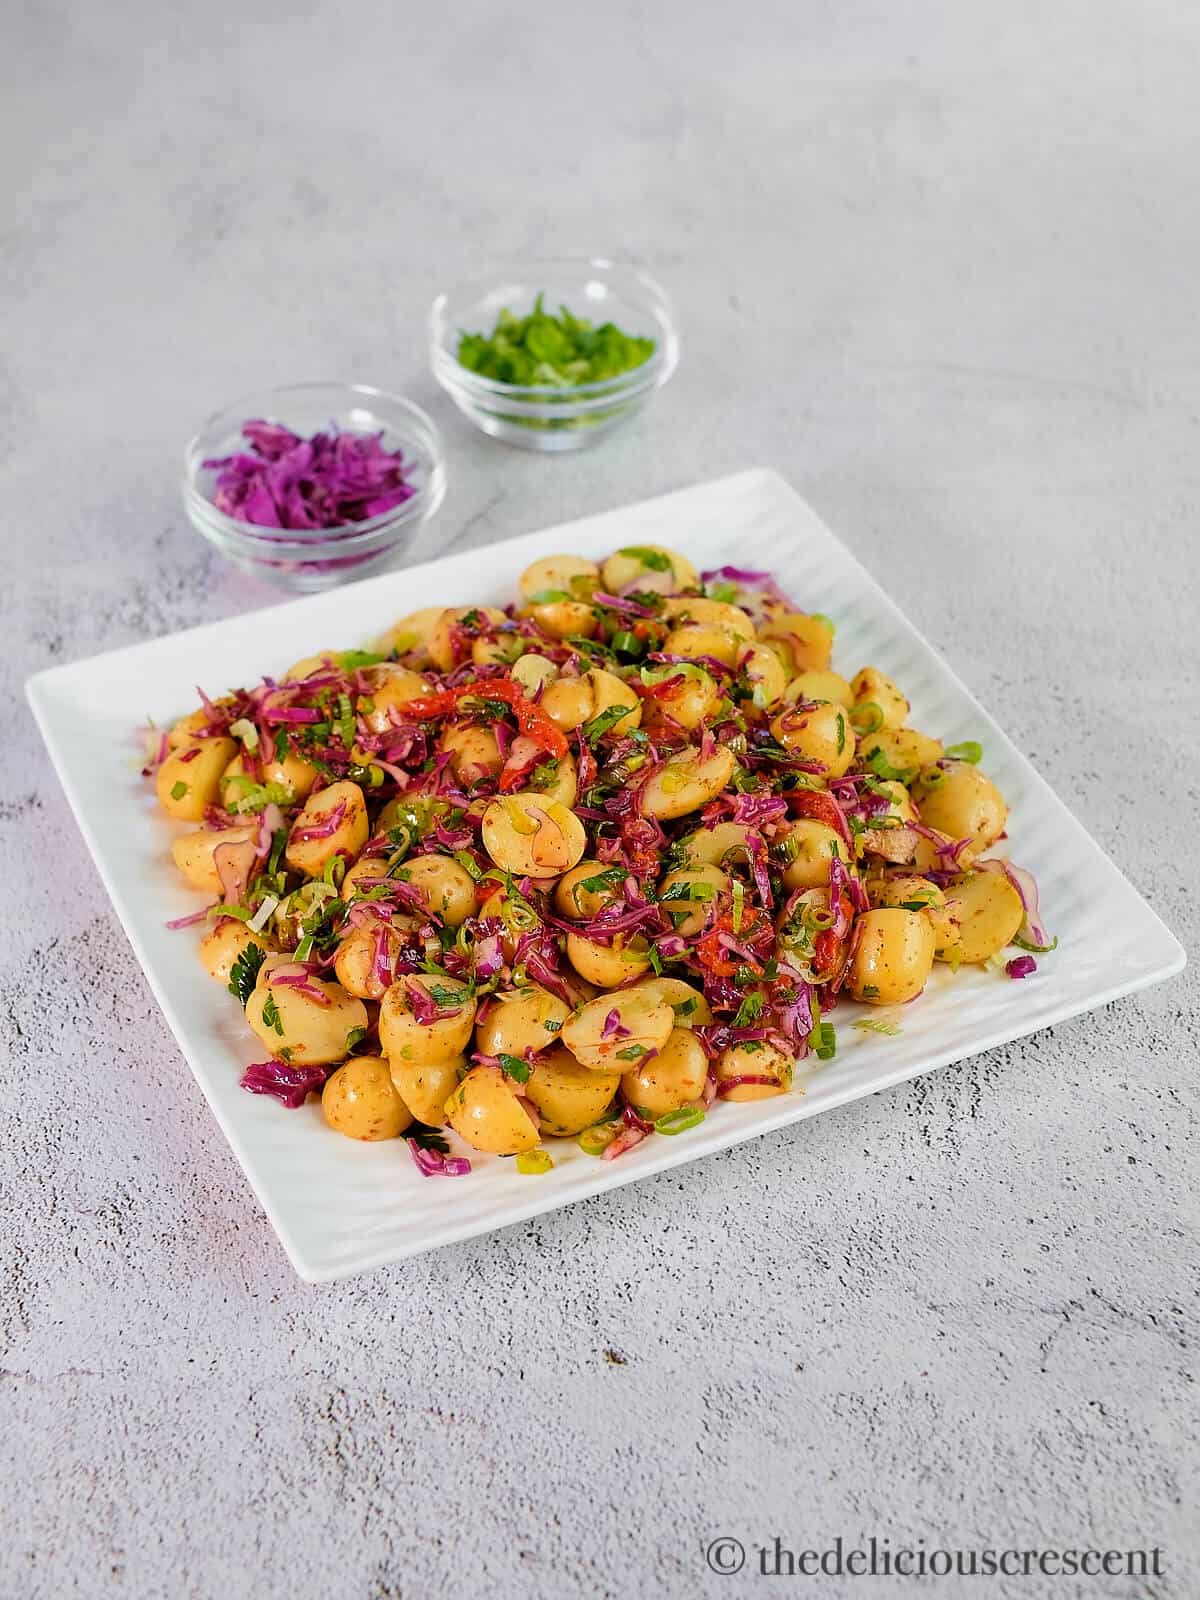 Salad made with baby potatoes, red cabbage, herb and mediterranean style dressing.